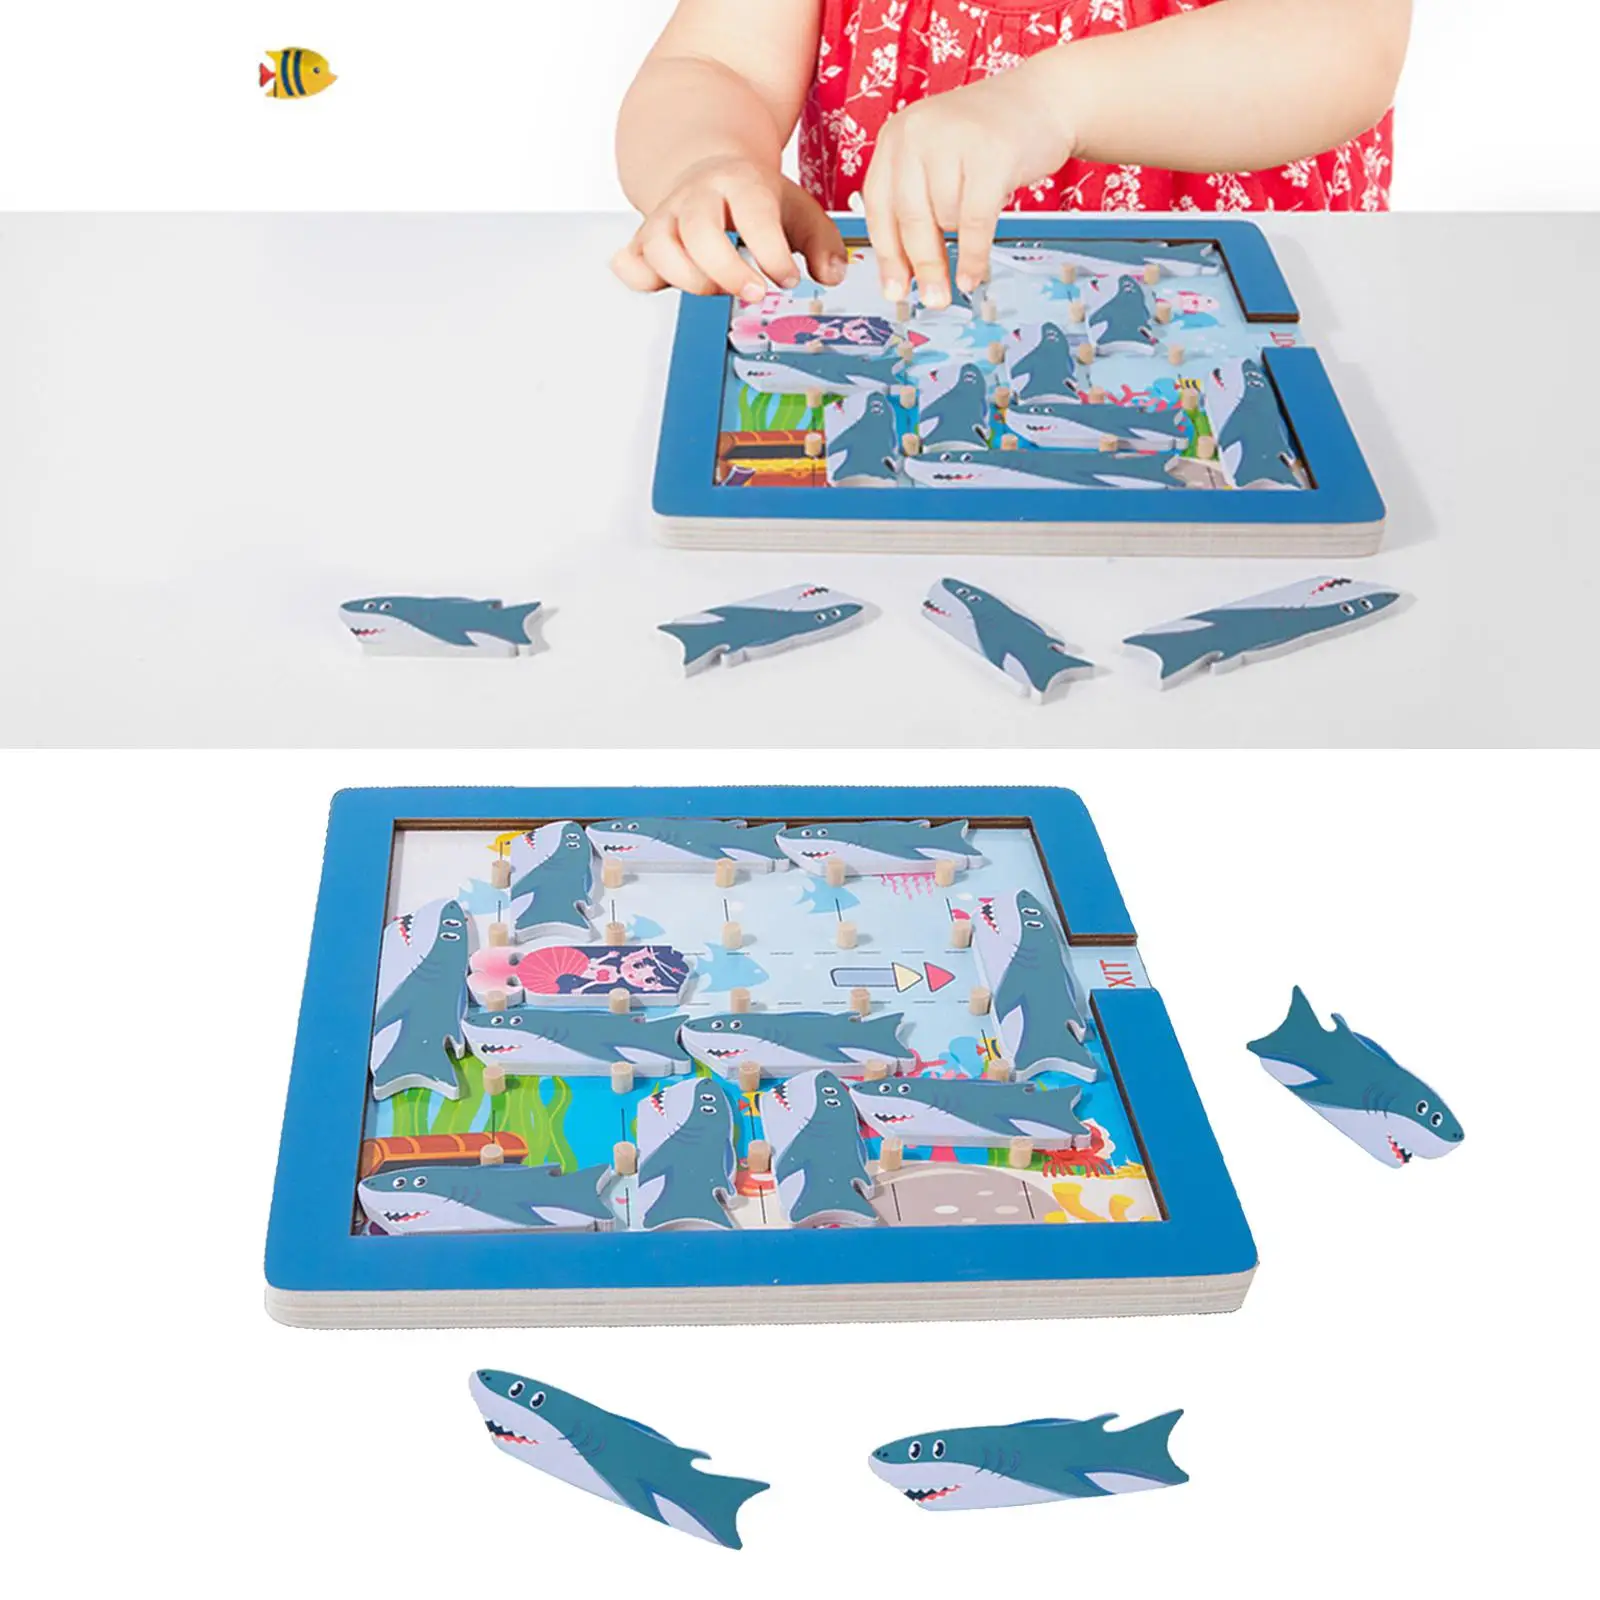 Fun Save Mermaid Jam Maze Board Escape Gridlock for Ages 3-7 Years Old Educational Logical Training Games Hand Eye Coordination